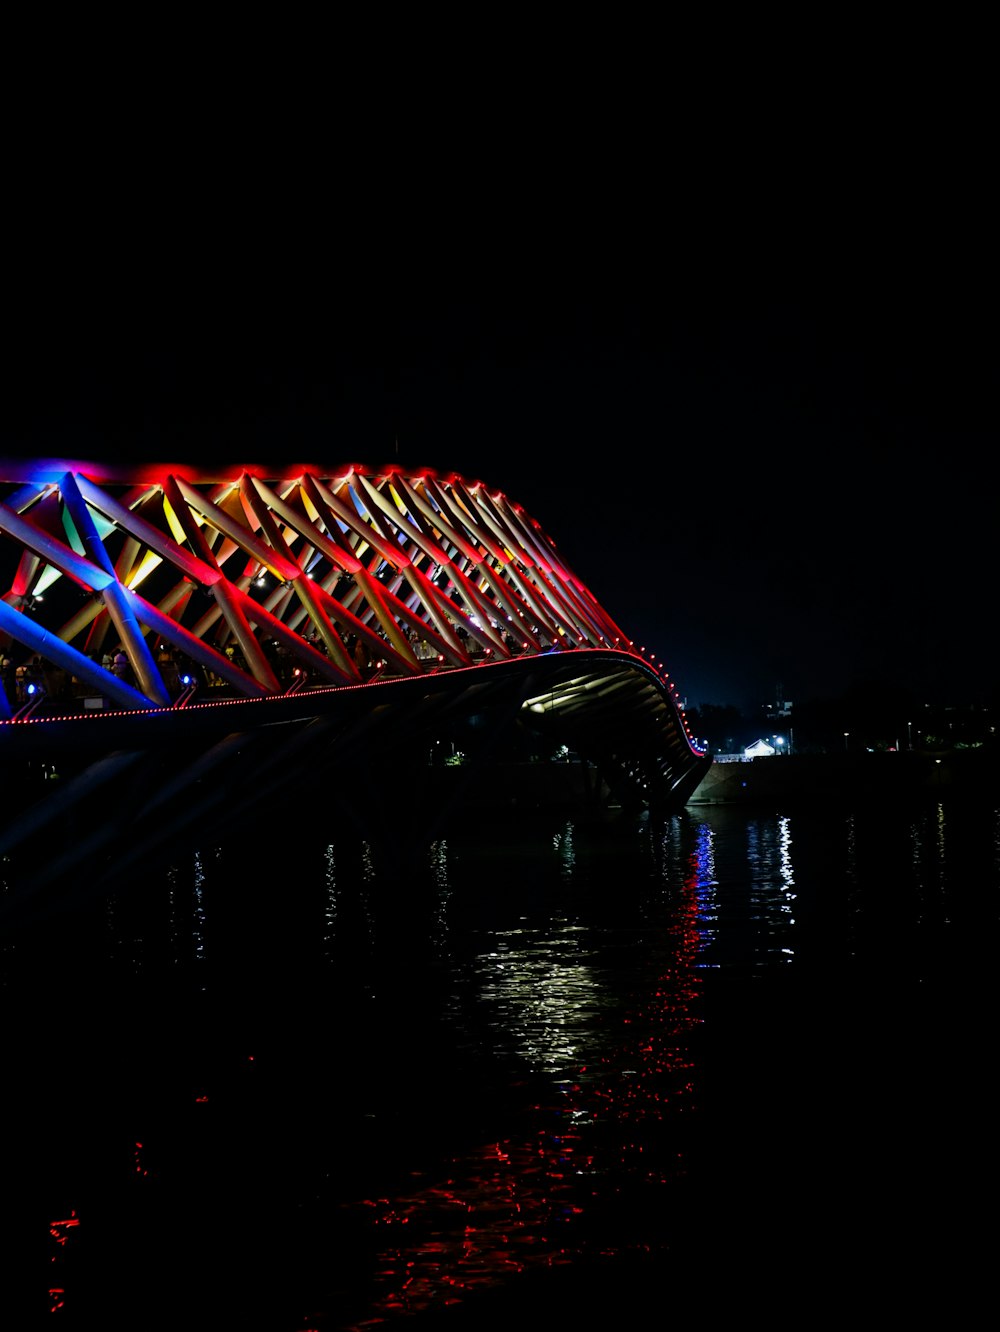 a bridge with lights at night